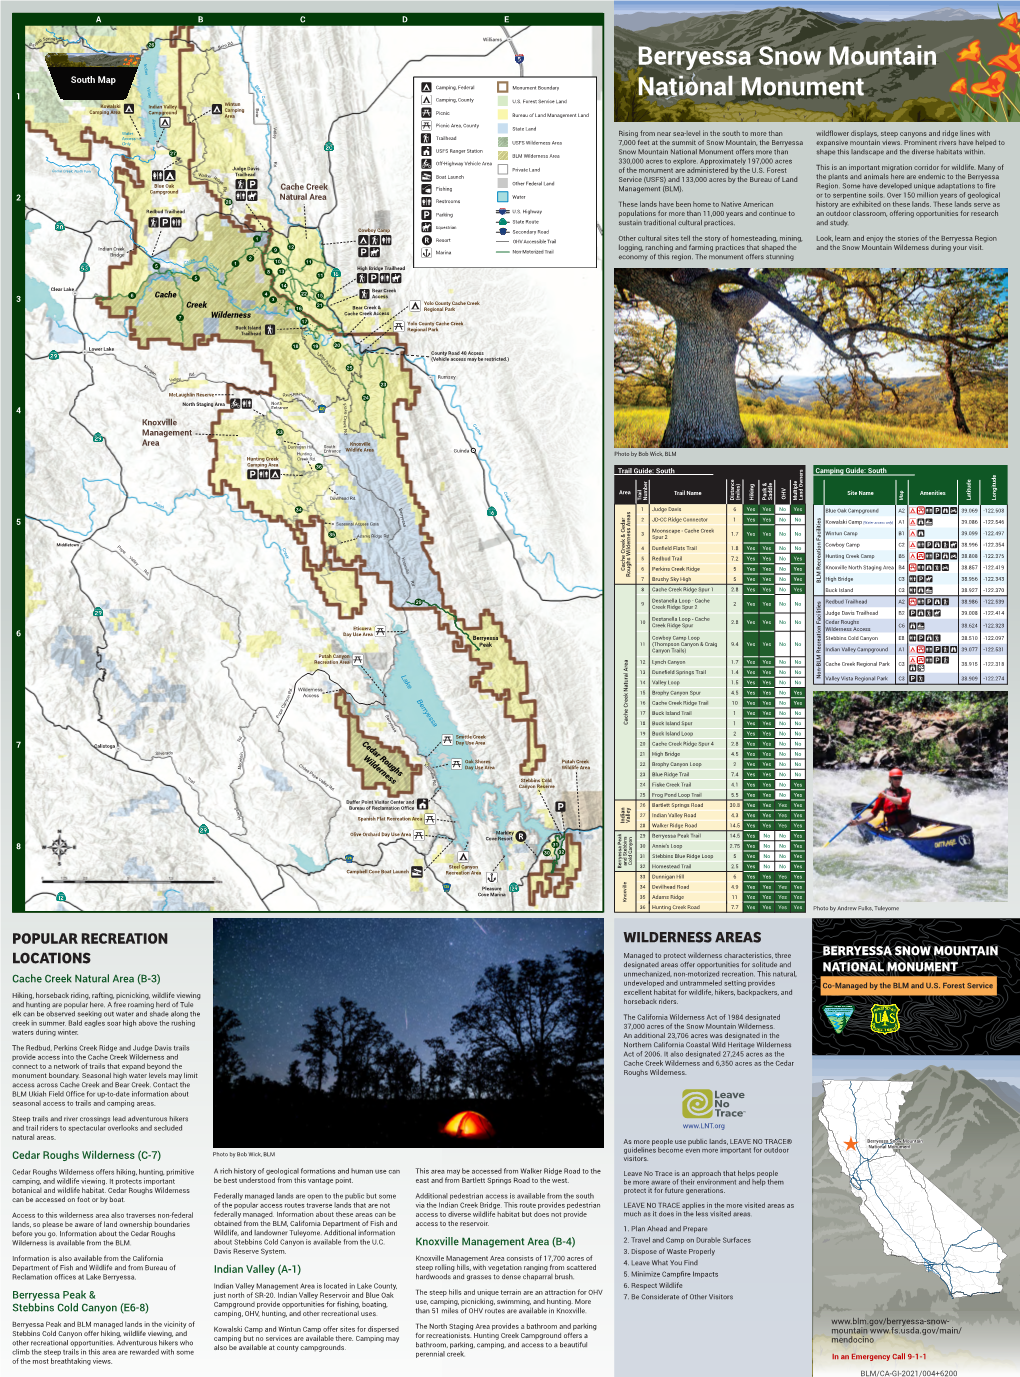 Berryessa Snow Mountain National Monument Map and Guide